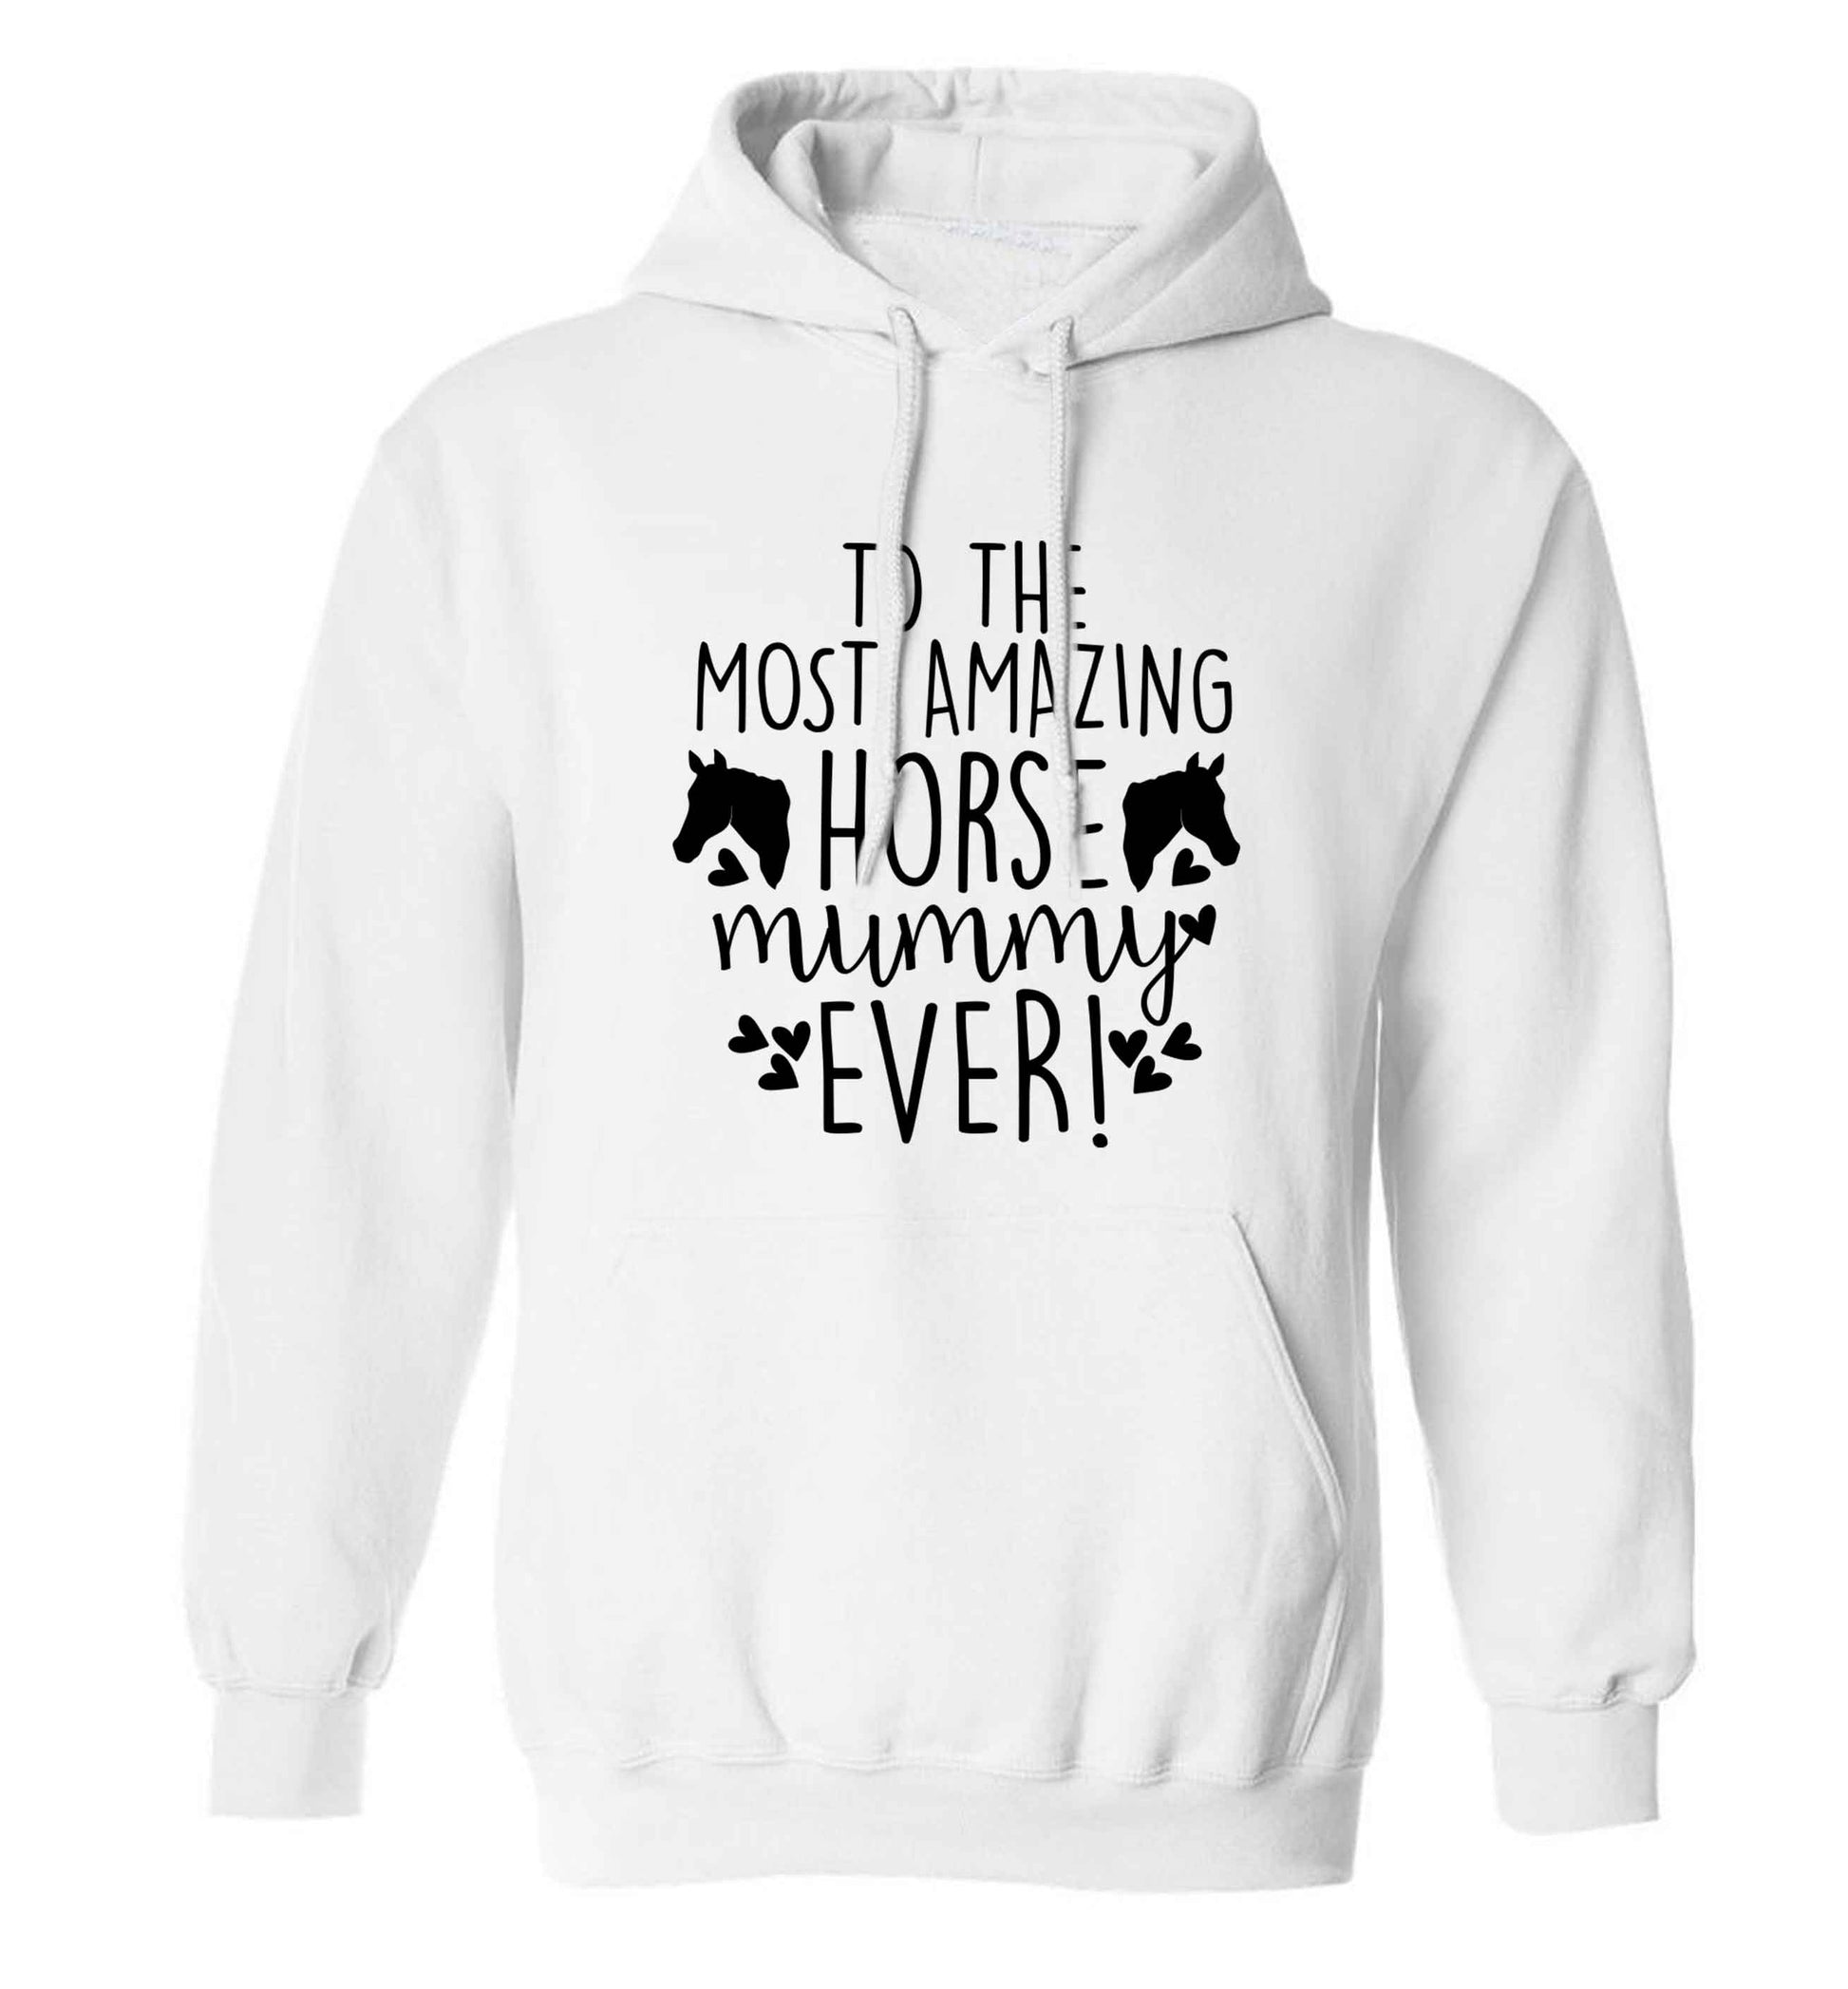 To the most amazing horse mummy ever! adults unisex white hoodie 2XL